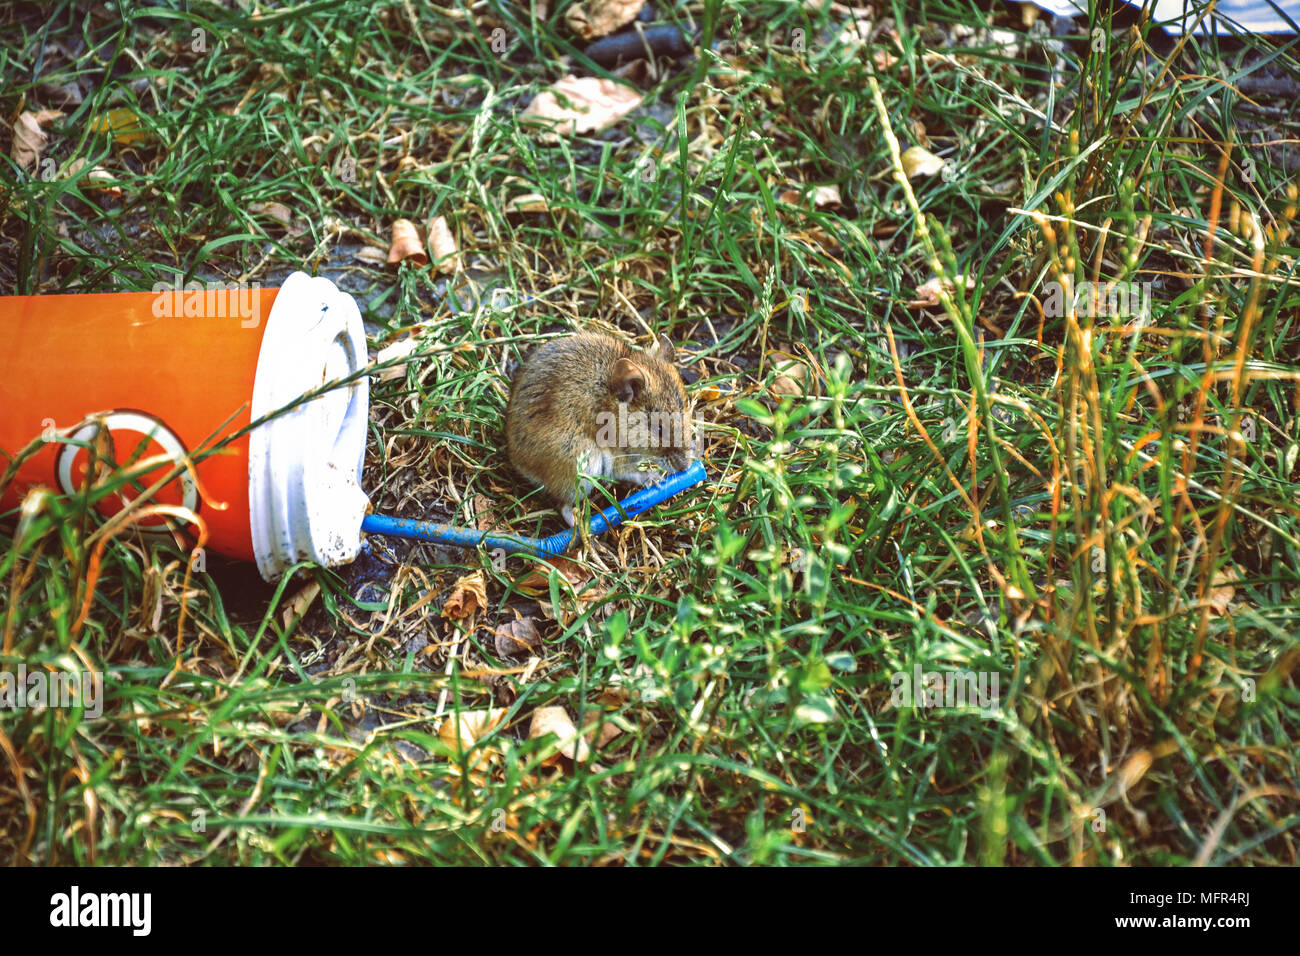 Little rat smelling plastic cup thrown on the grass Stock Photo